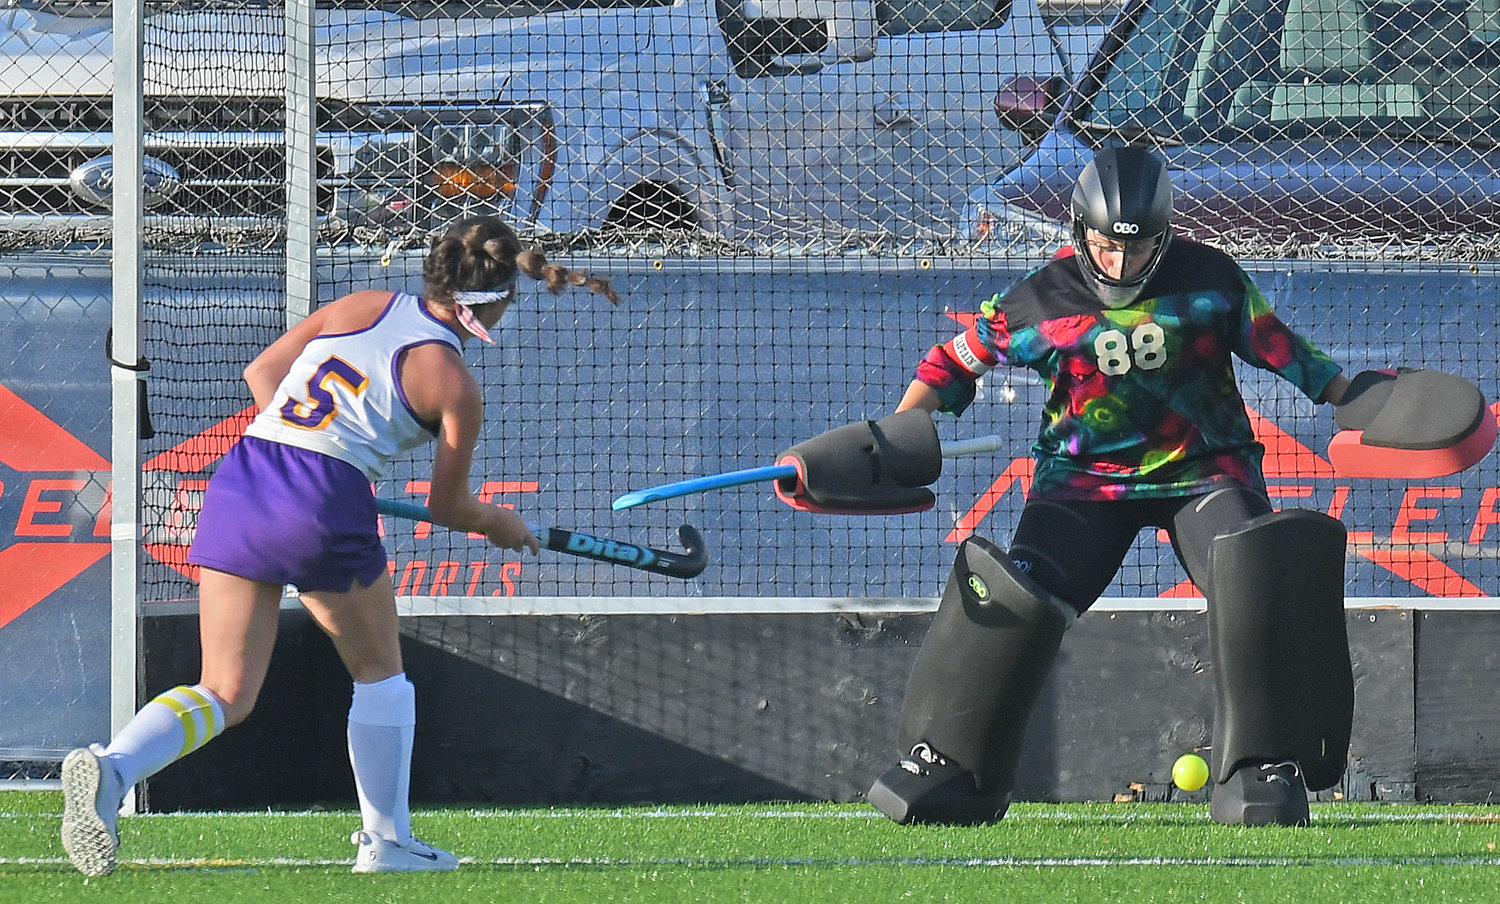 Holland Patent’s Madison Oliver shoots and scores against Vernon-Verona-Sherrill goalie Devyn Balfe on Monday at Accelerate Sports Complex. Oliver scored two goals as the Golden Knights won 6-0.